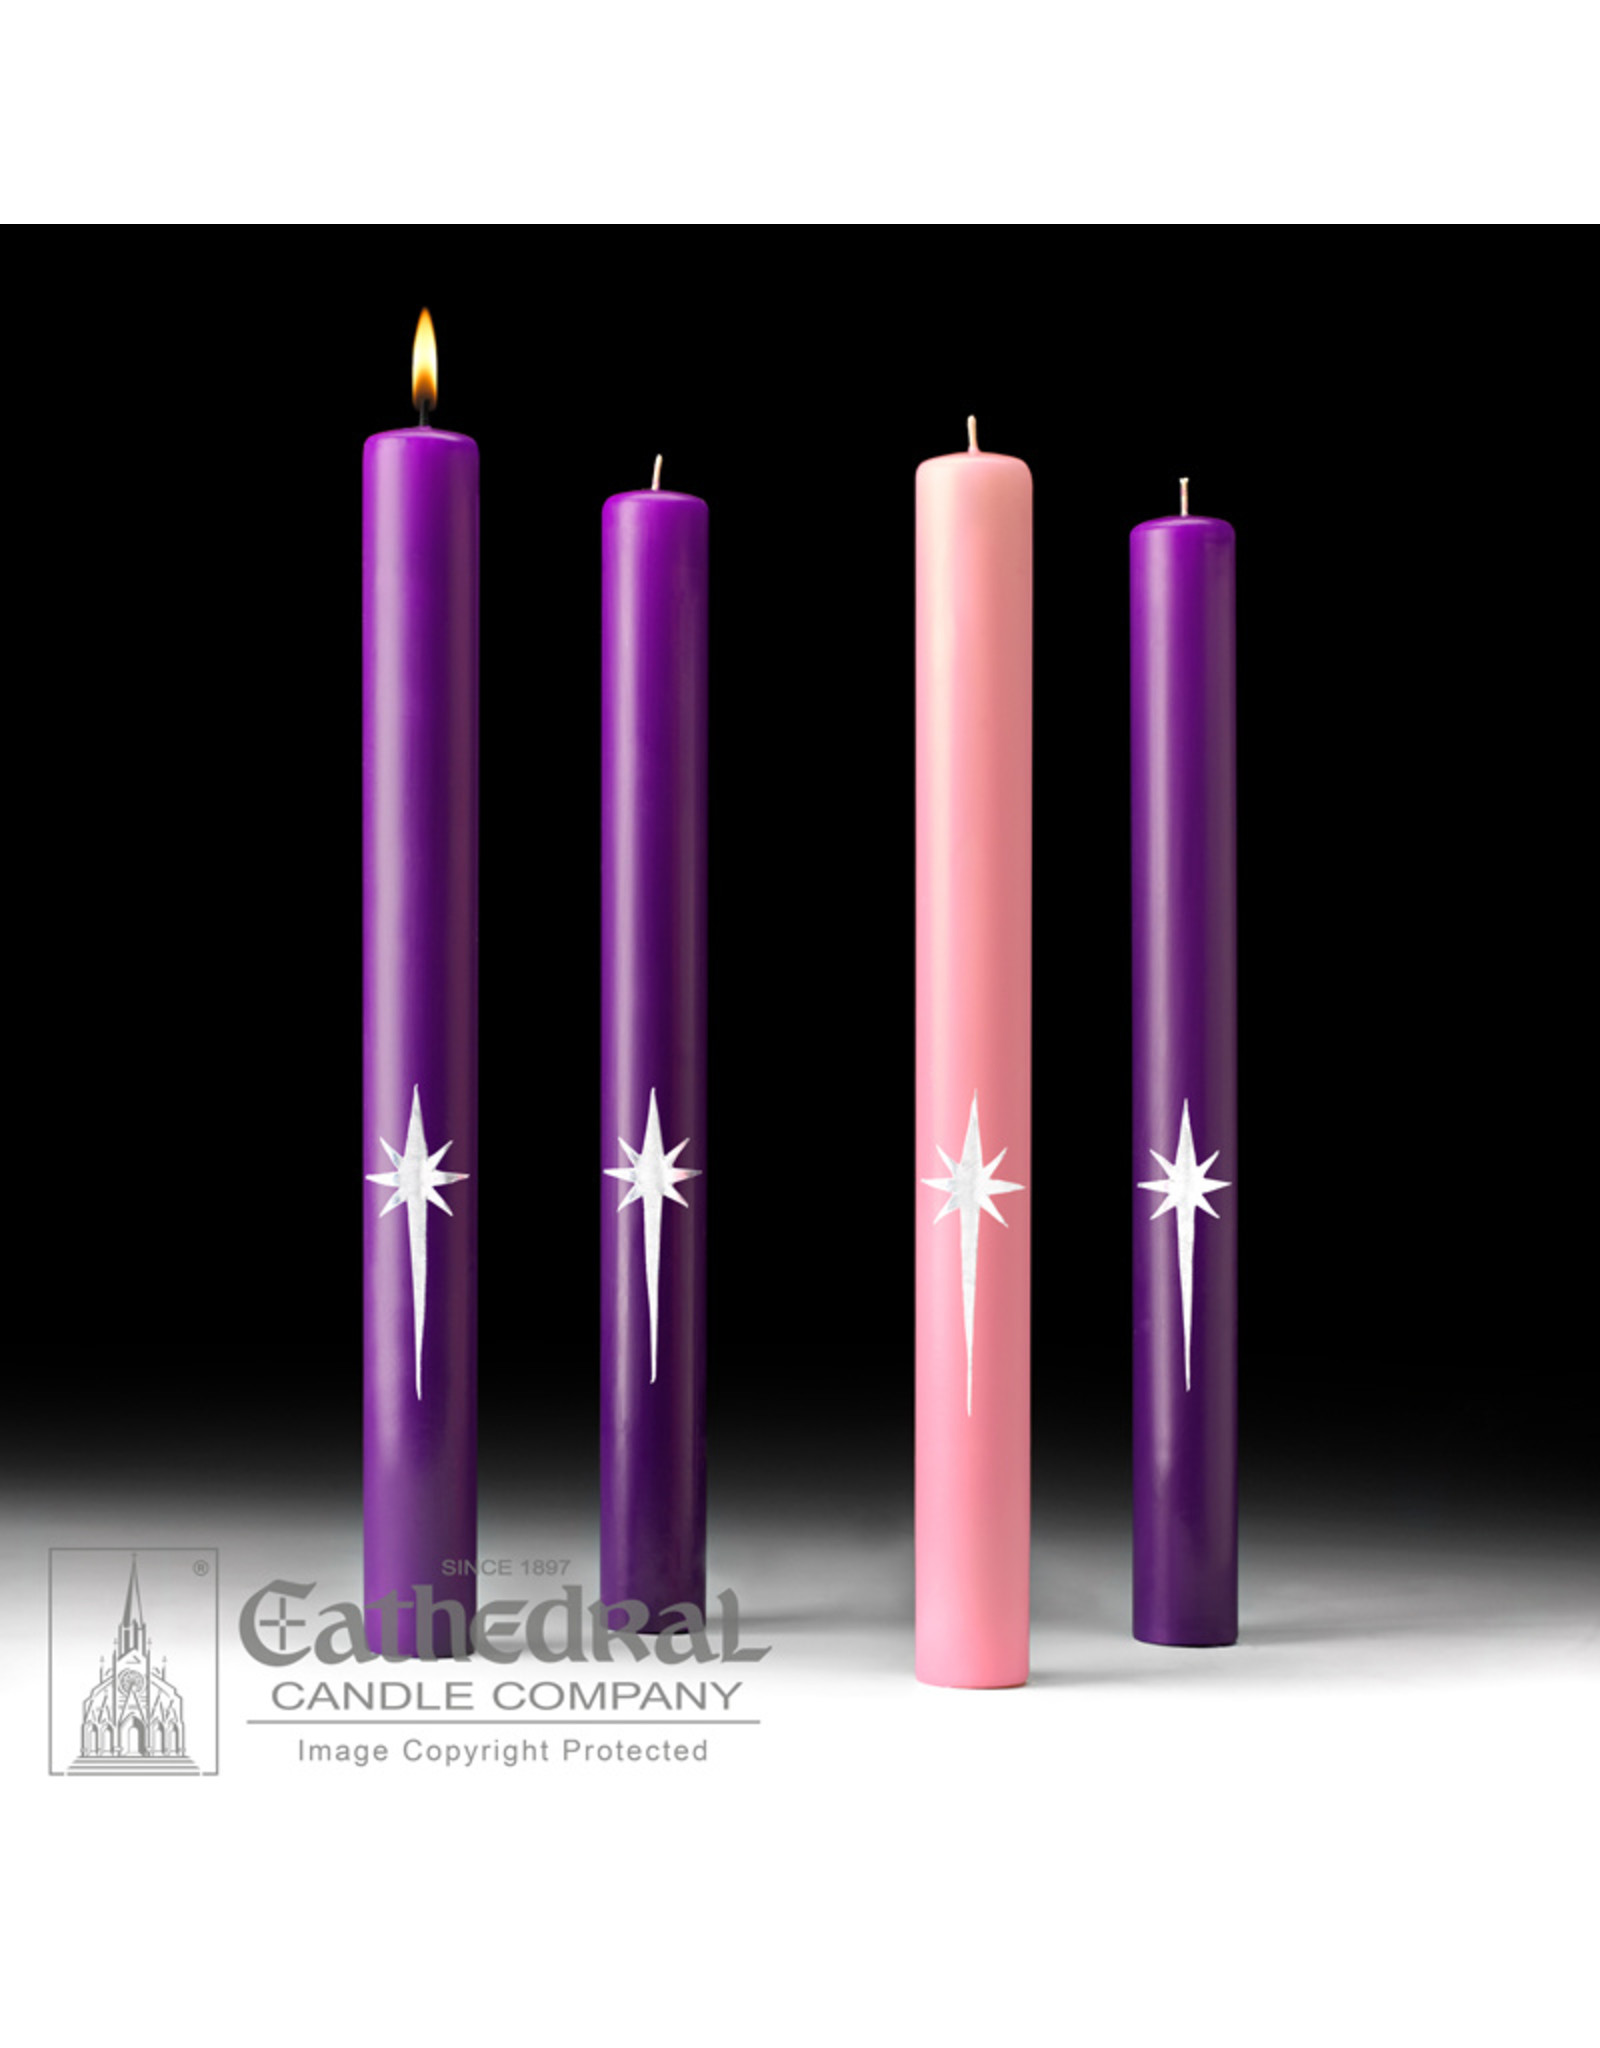 Cathedral Candle 51% Beeswax Advent Candles ("Star of the Magi") 1.5x16 (3 Purple, 1 Rose)